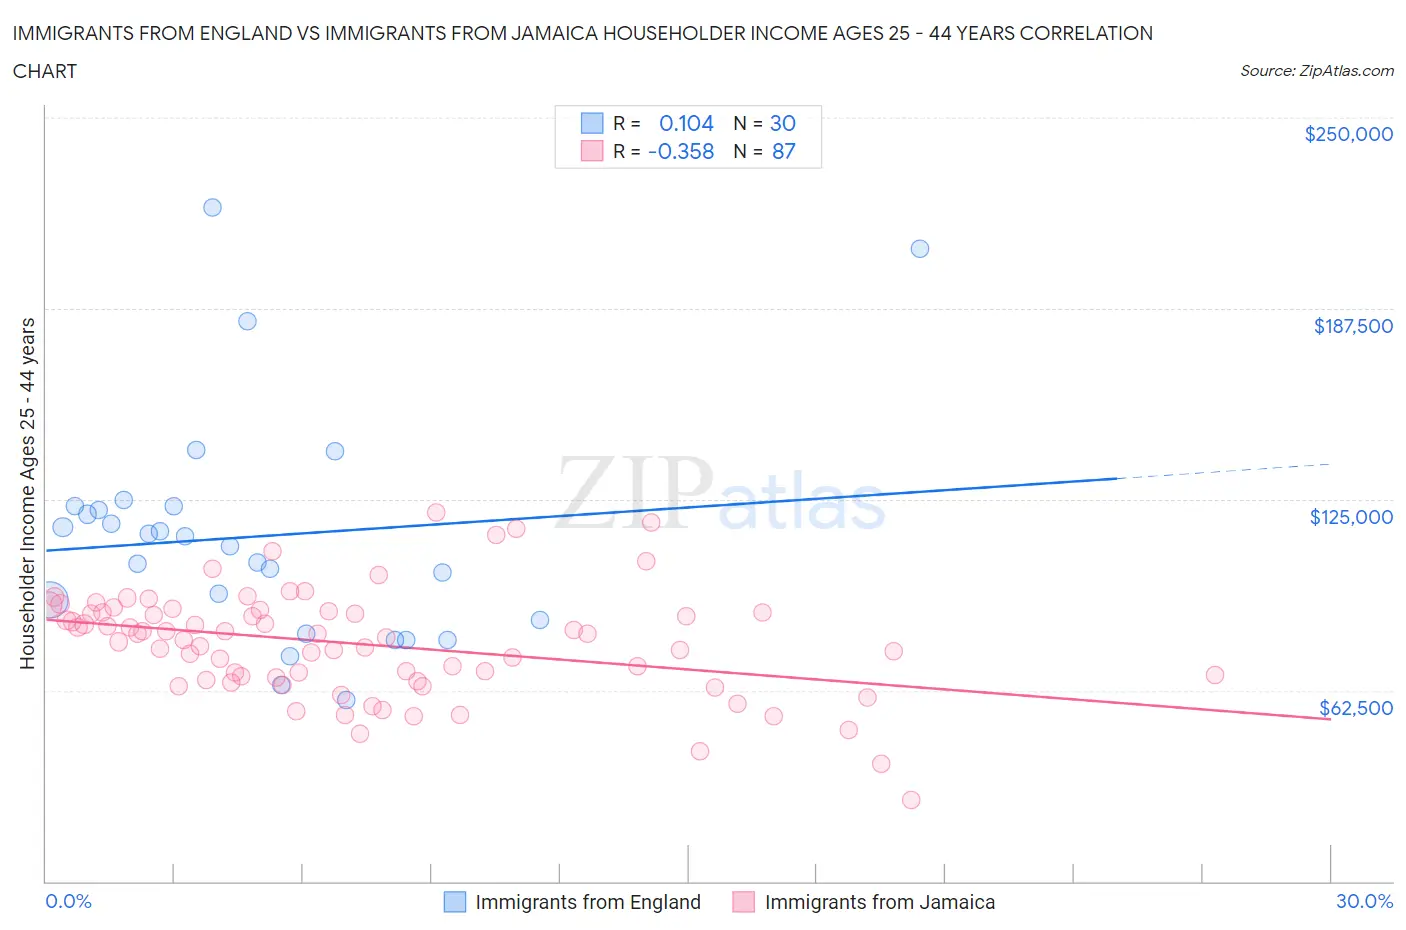 Immigrants from England vs Immigrants from Jamaica Householder Income Ages 25 - 44 years